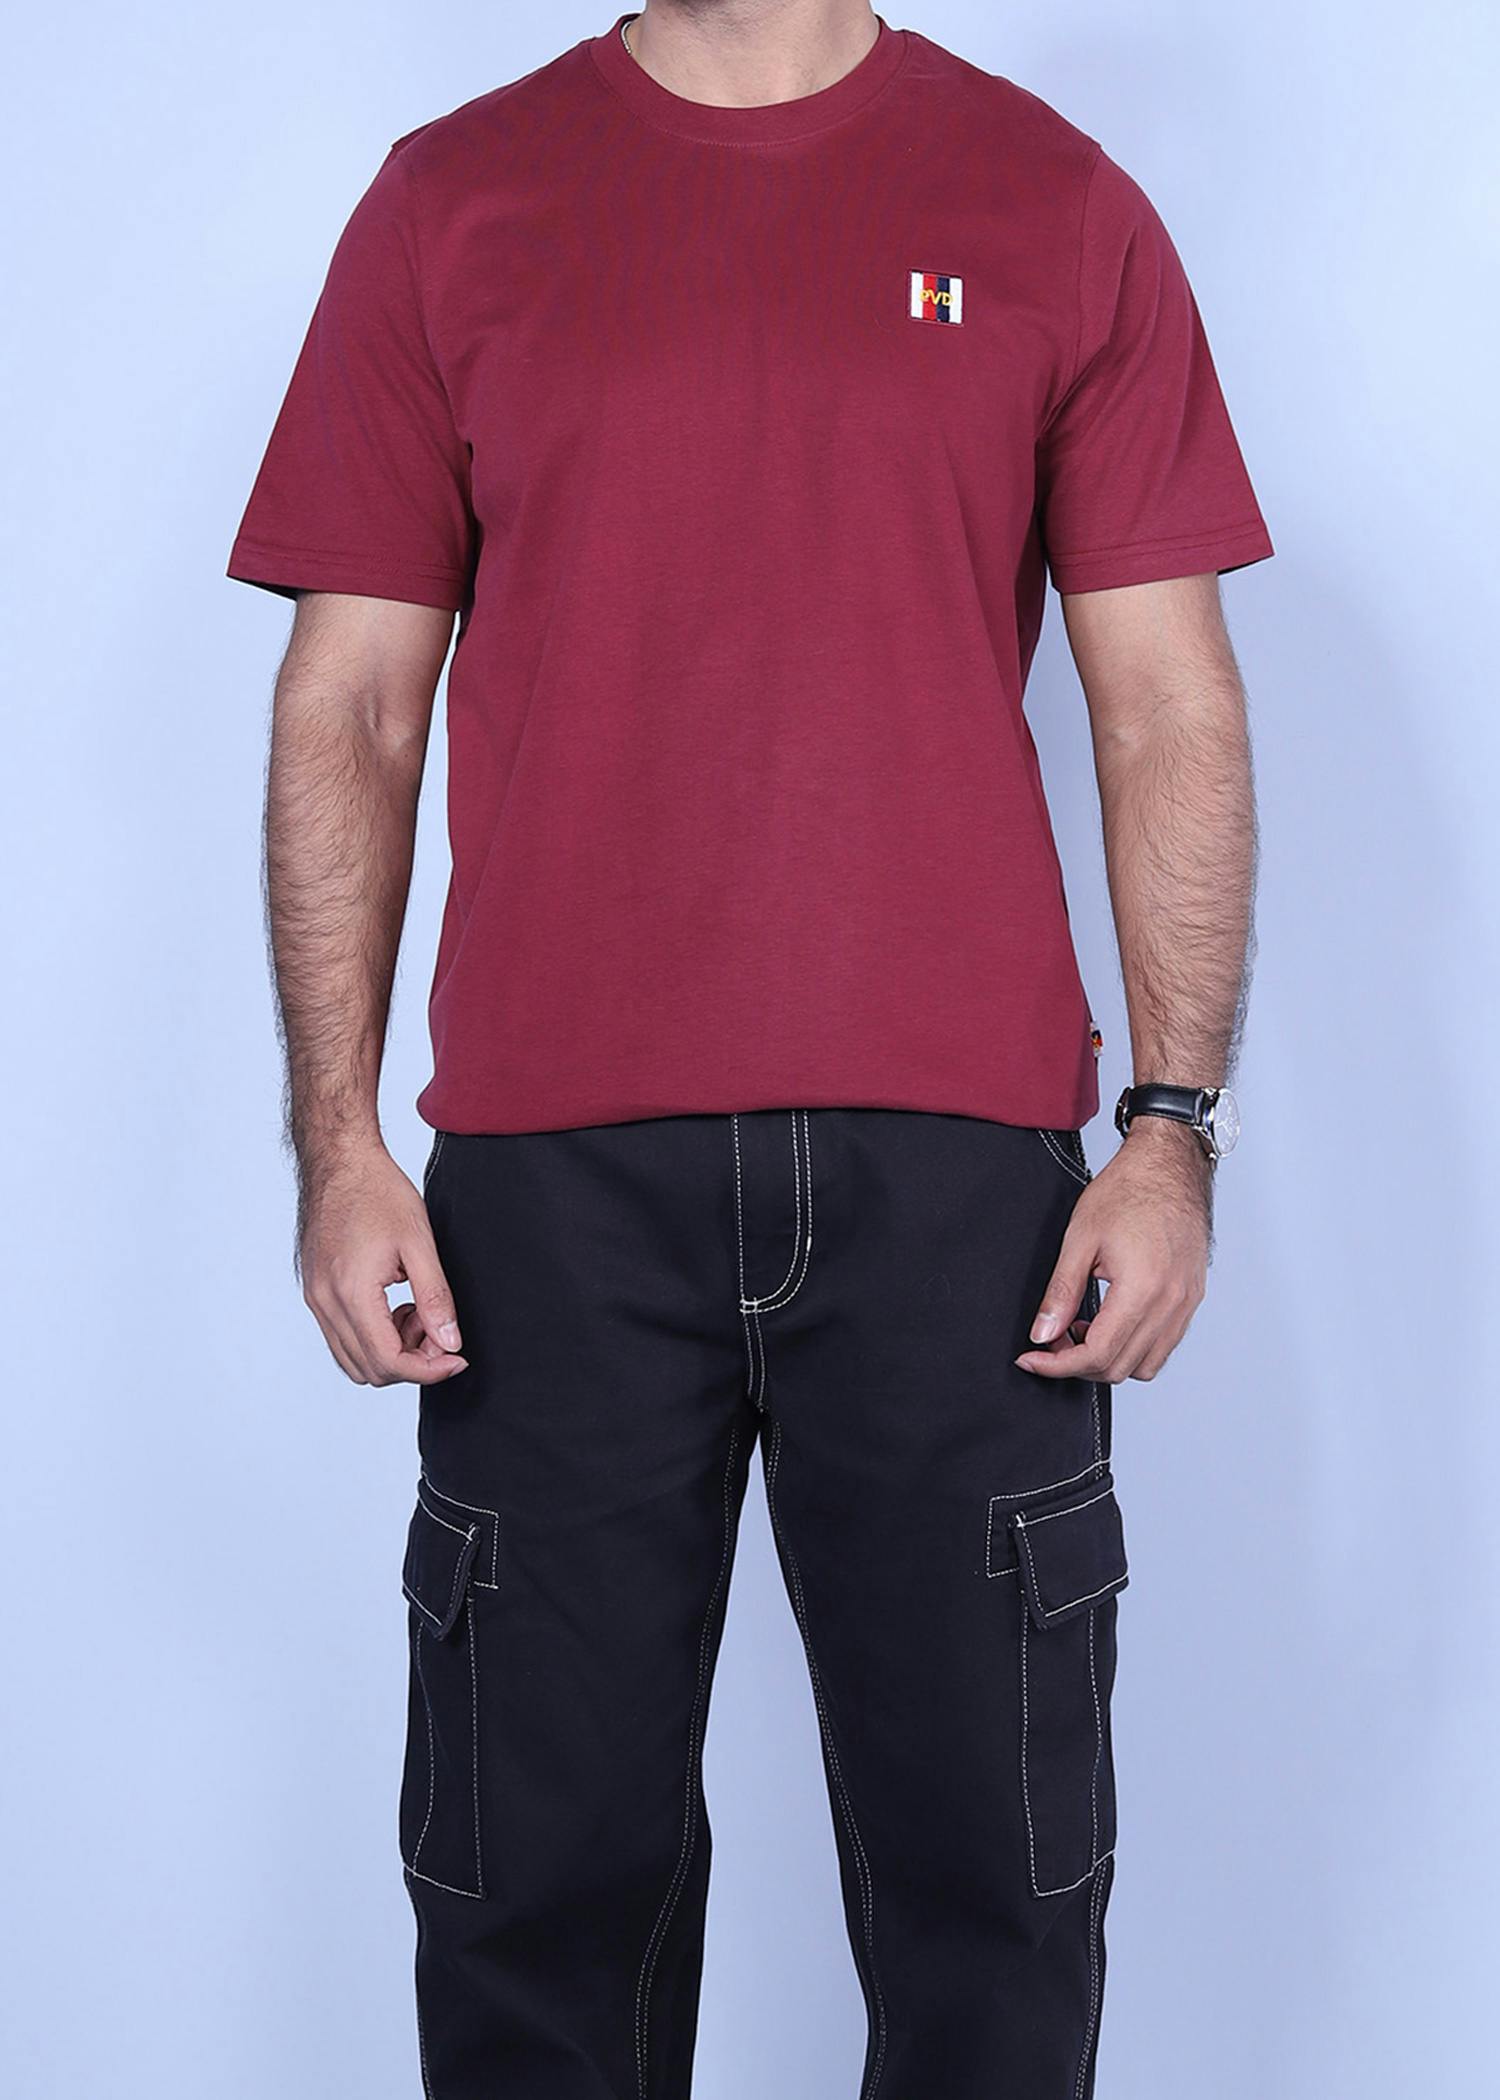 california t shirt burgundy color full front view